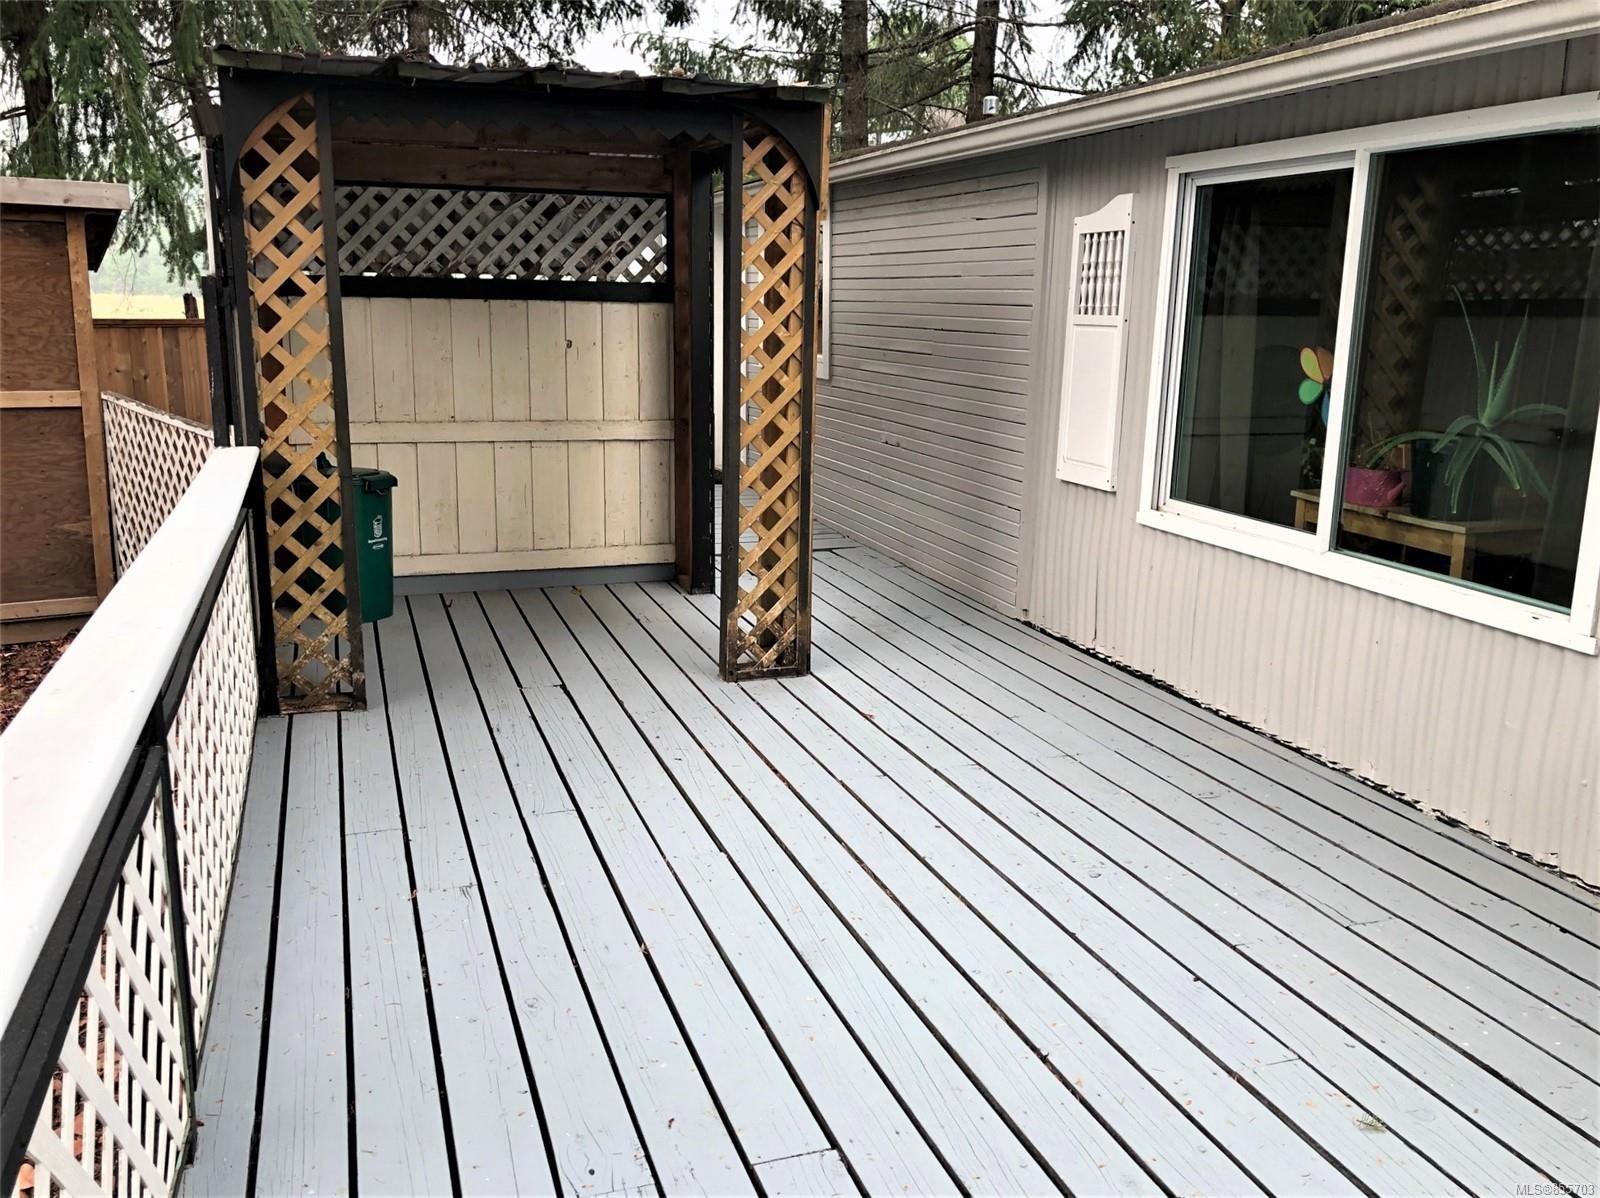 Photo 10: Photos: 38A 1247 Arbutus Rd in Parksville: PQ Parksville Manufactured Home for sale (Parksville/Qualicum)  : MLS®# 855703